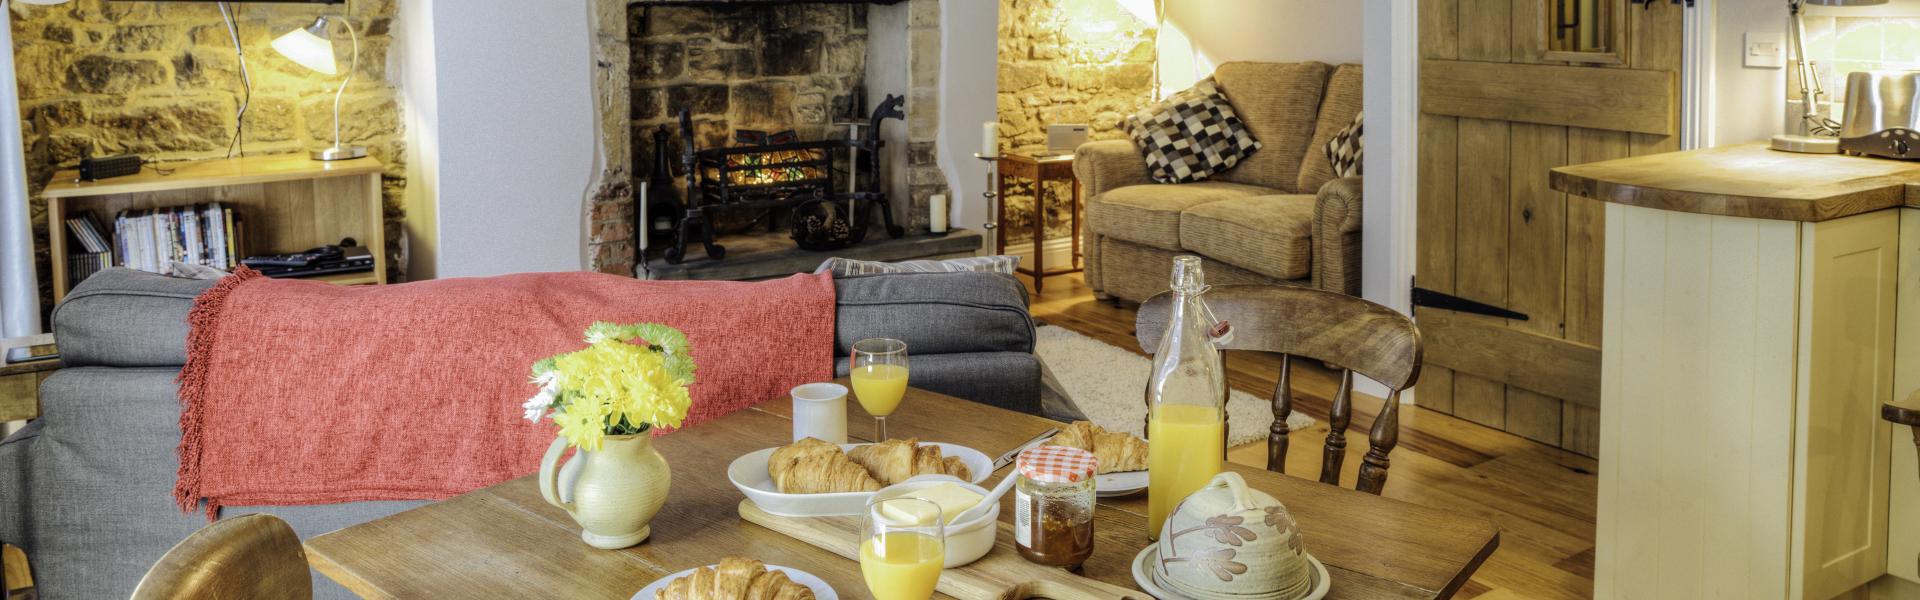 Bed and Breakfast Accommodation in Northern Ireland - HomeToGo